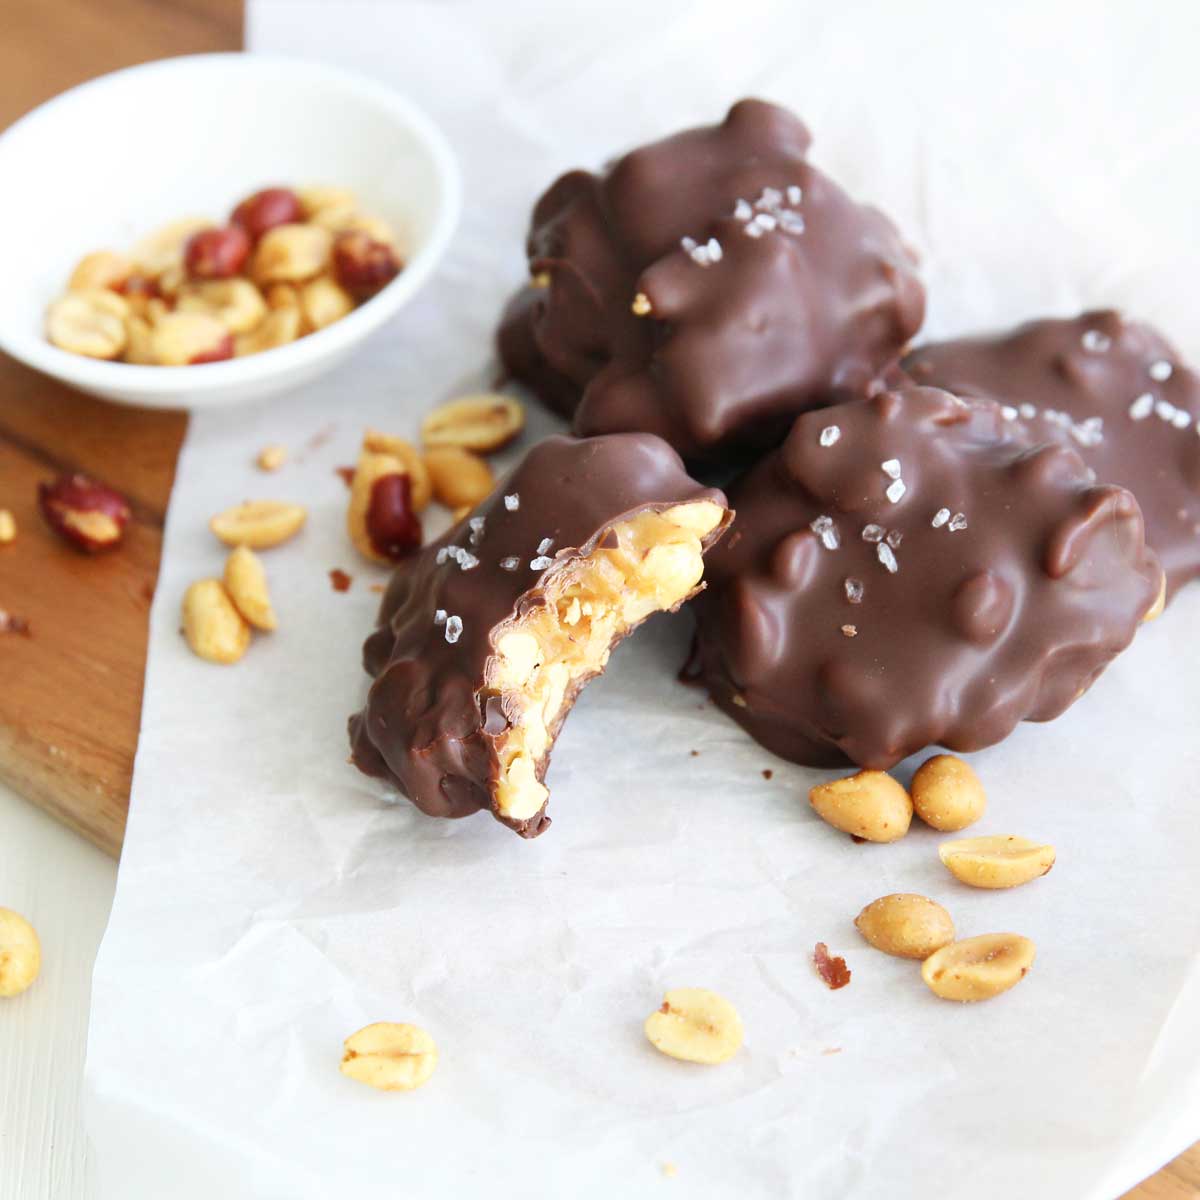 Chocolate Peanut Clusters with Collagen Caramel Filling (Easy, Keto Recipe) - Caramel Apple Dip